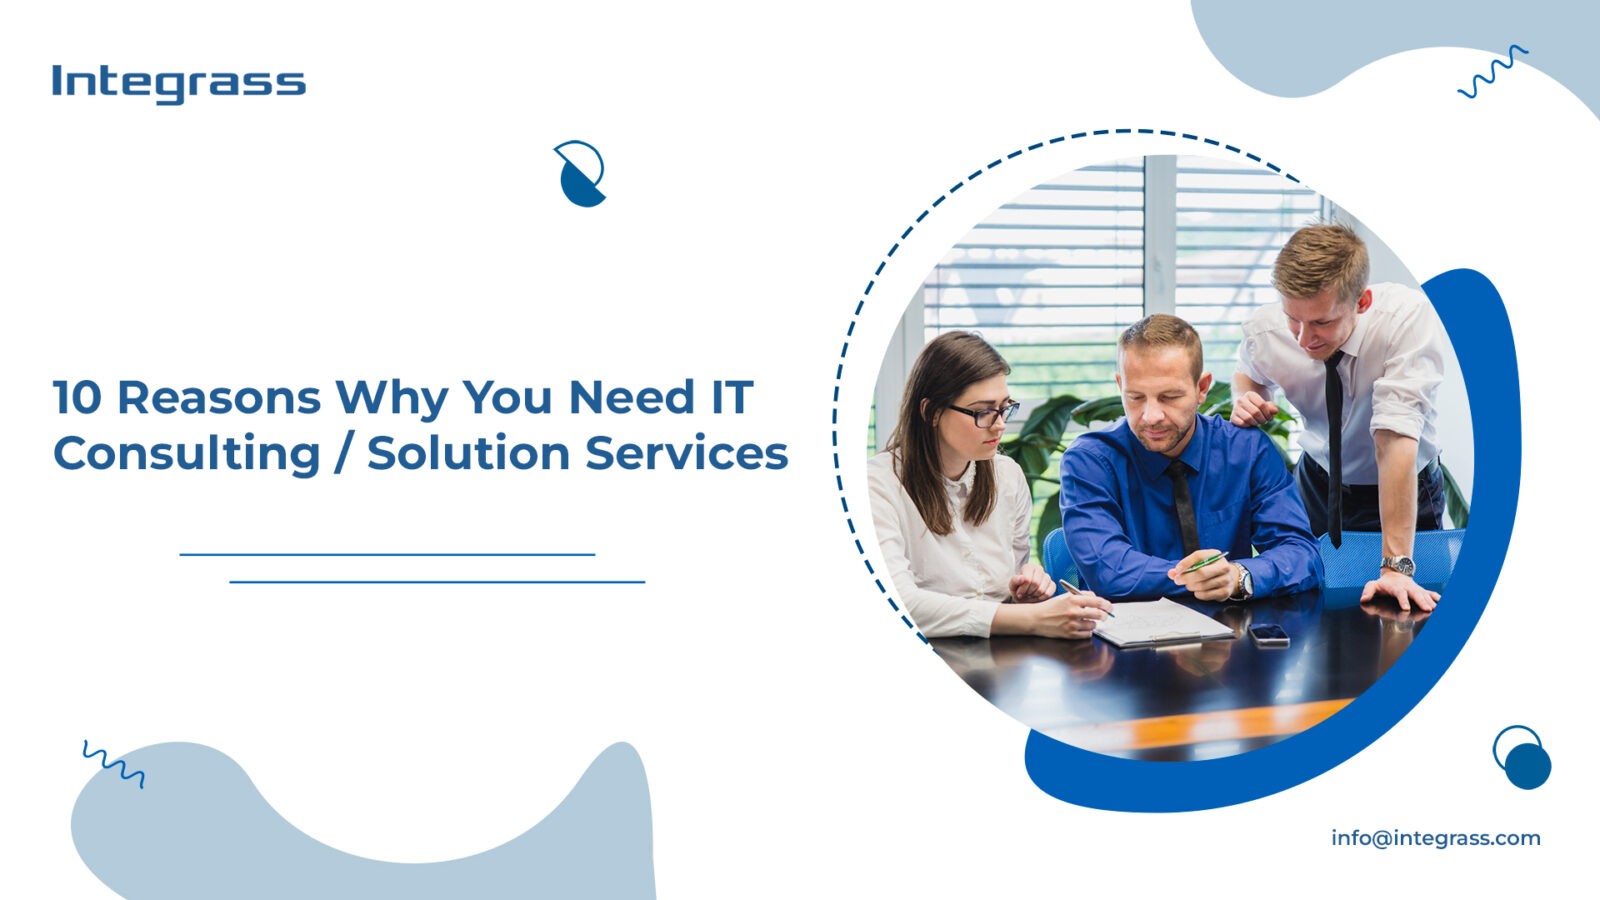 Three IT professionals in a meeting and the text on the left reads “10 Reasons Why You Need IT Consulting/Solution Services”